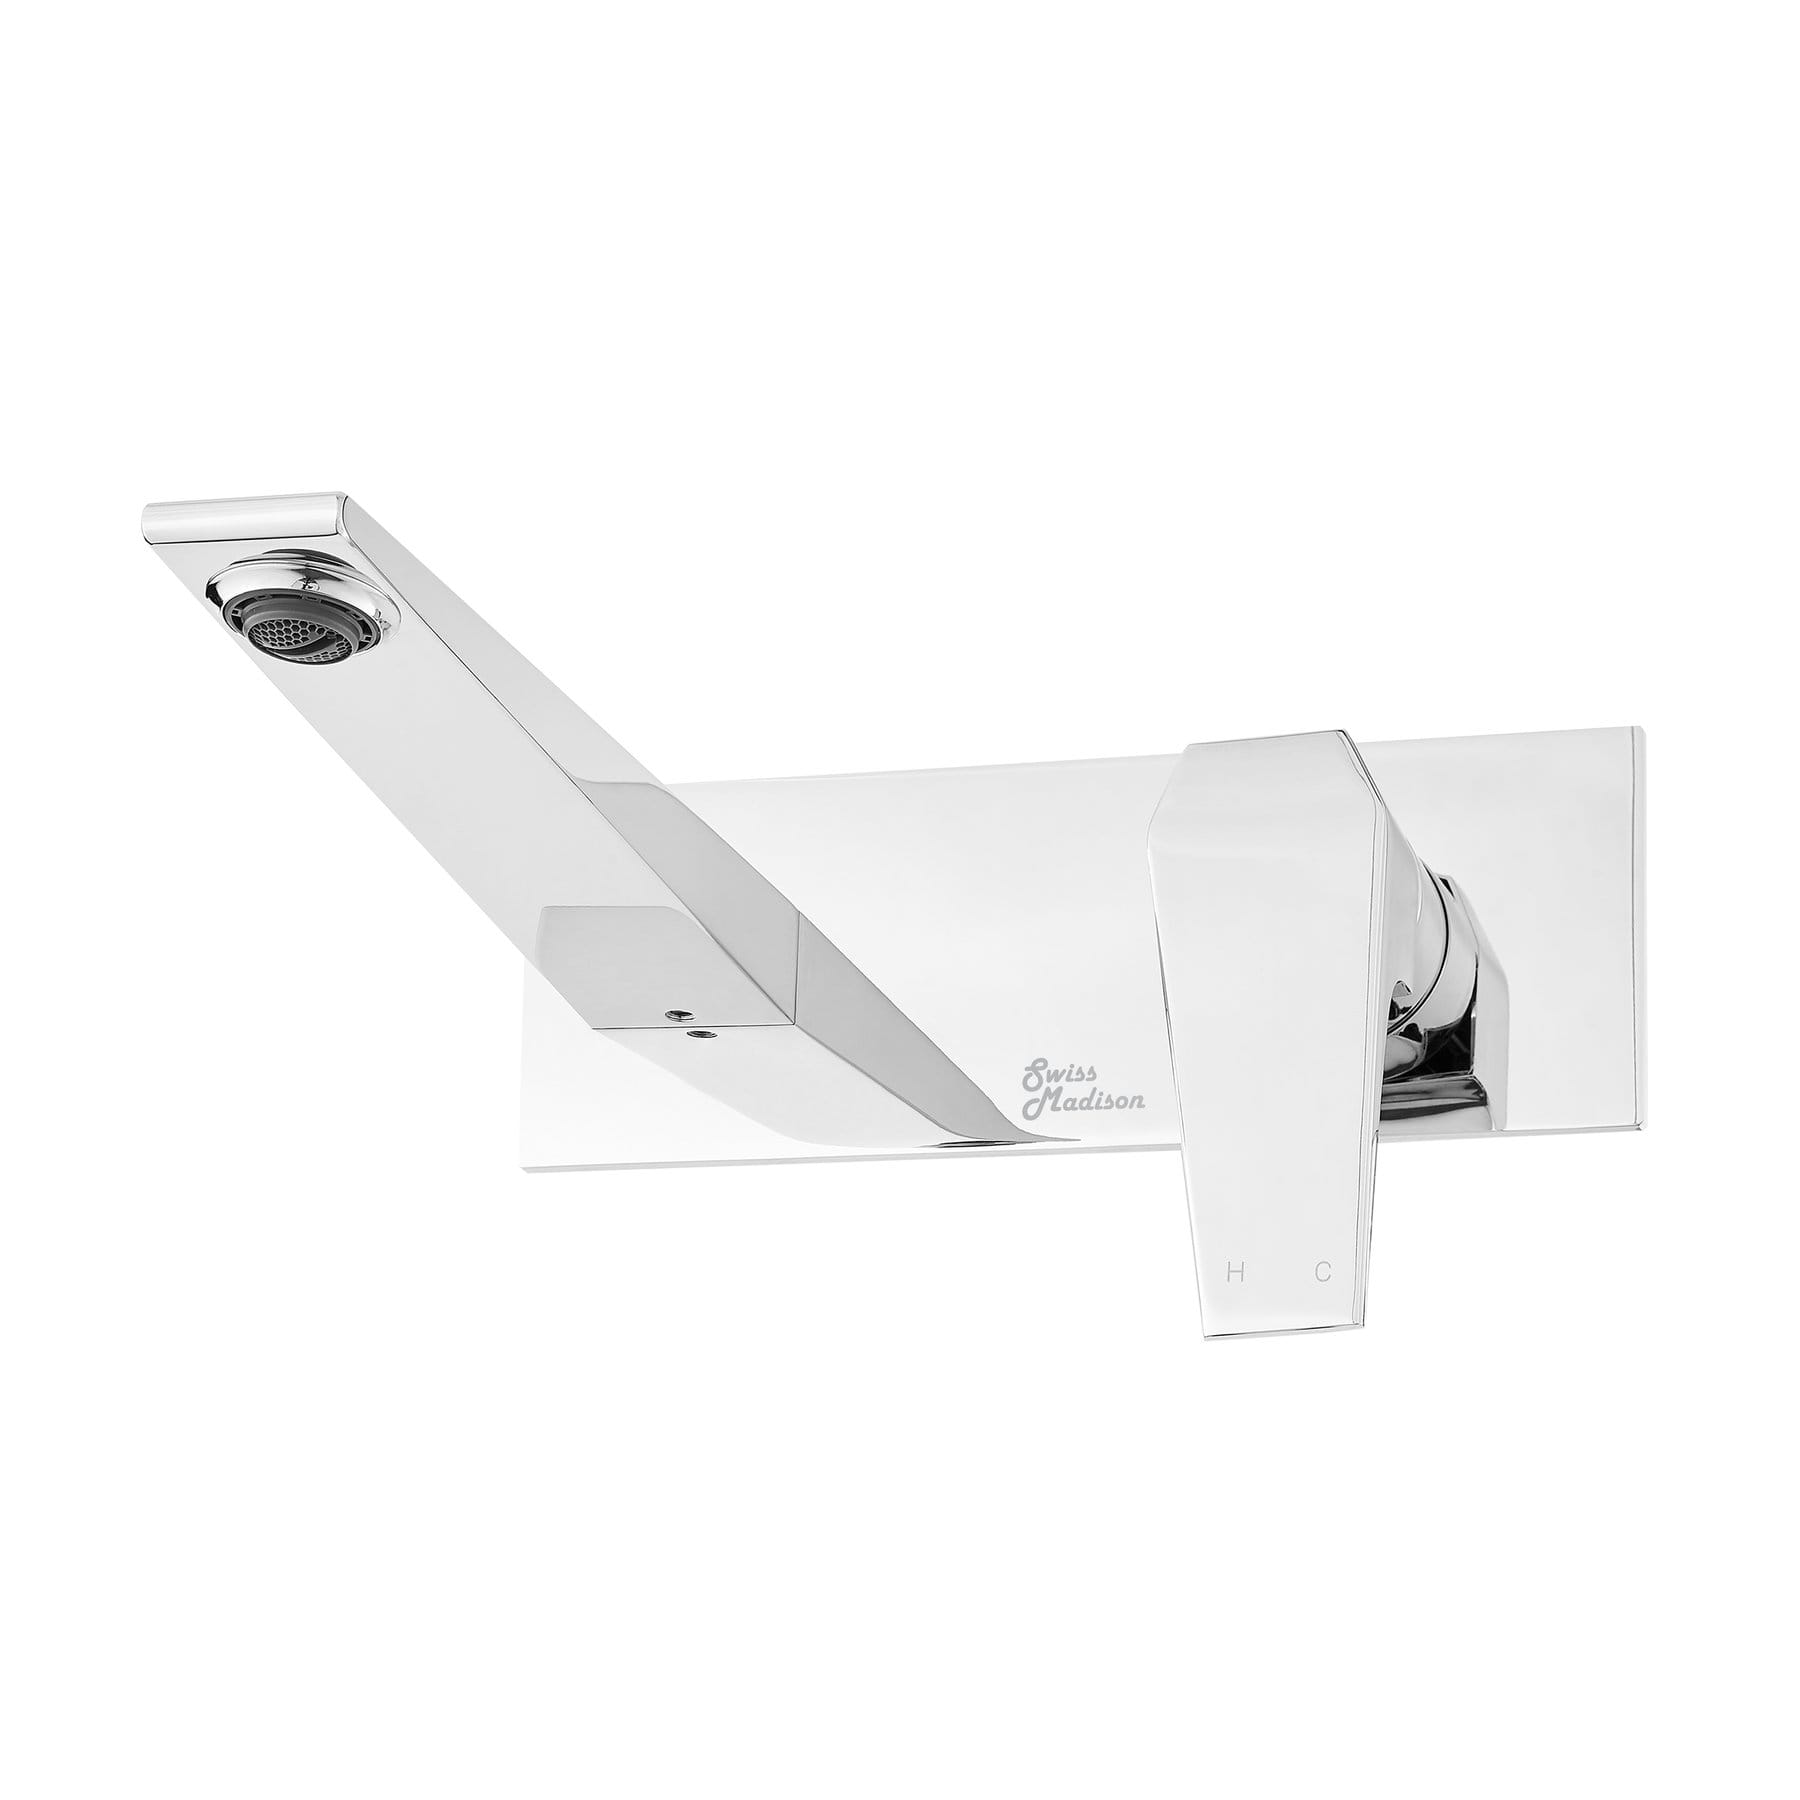 Swiss Madison Voltaire Single-Handle, Wall-Mount, Bathroom Faucet in Chrome - SM-BF42C - Molaix723552143826AccessoriesSM-BF42C